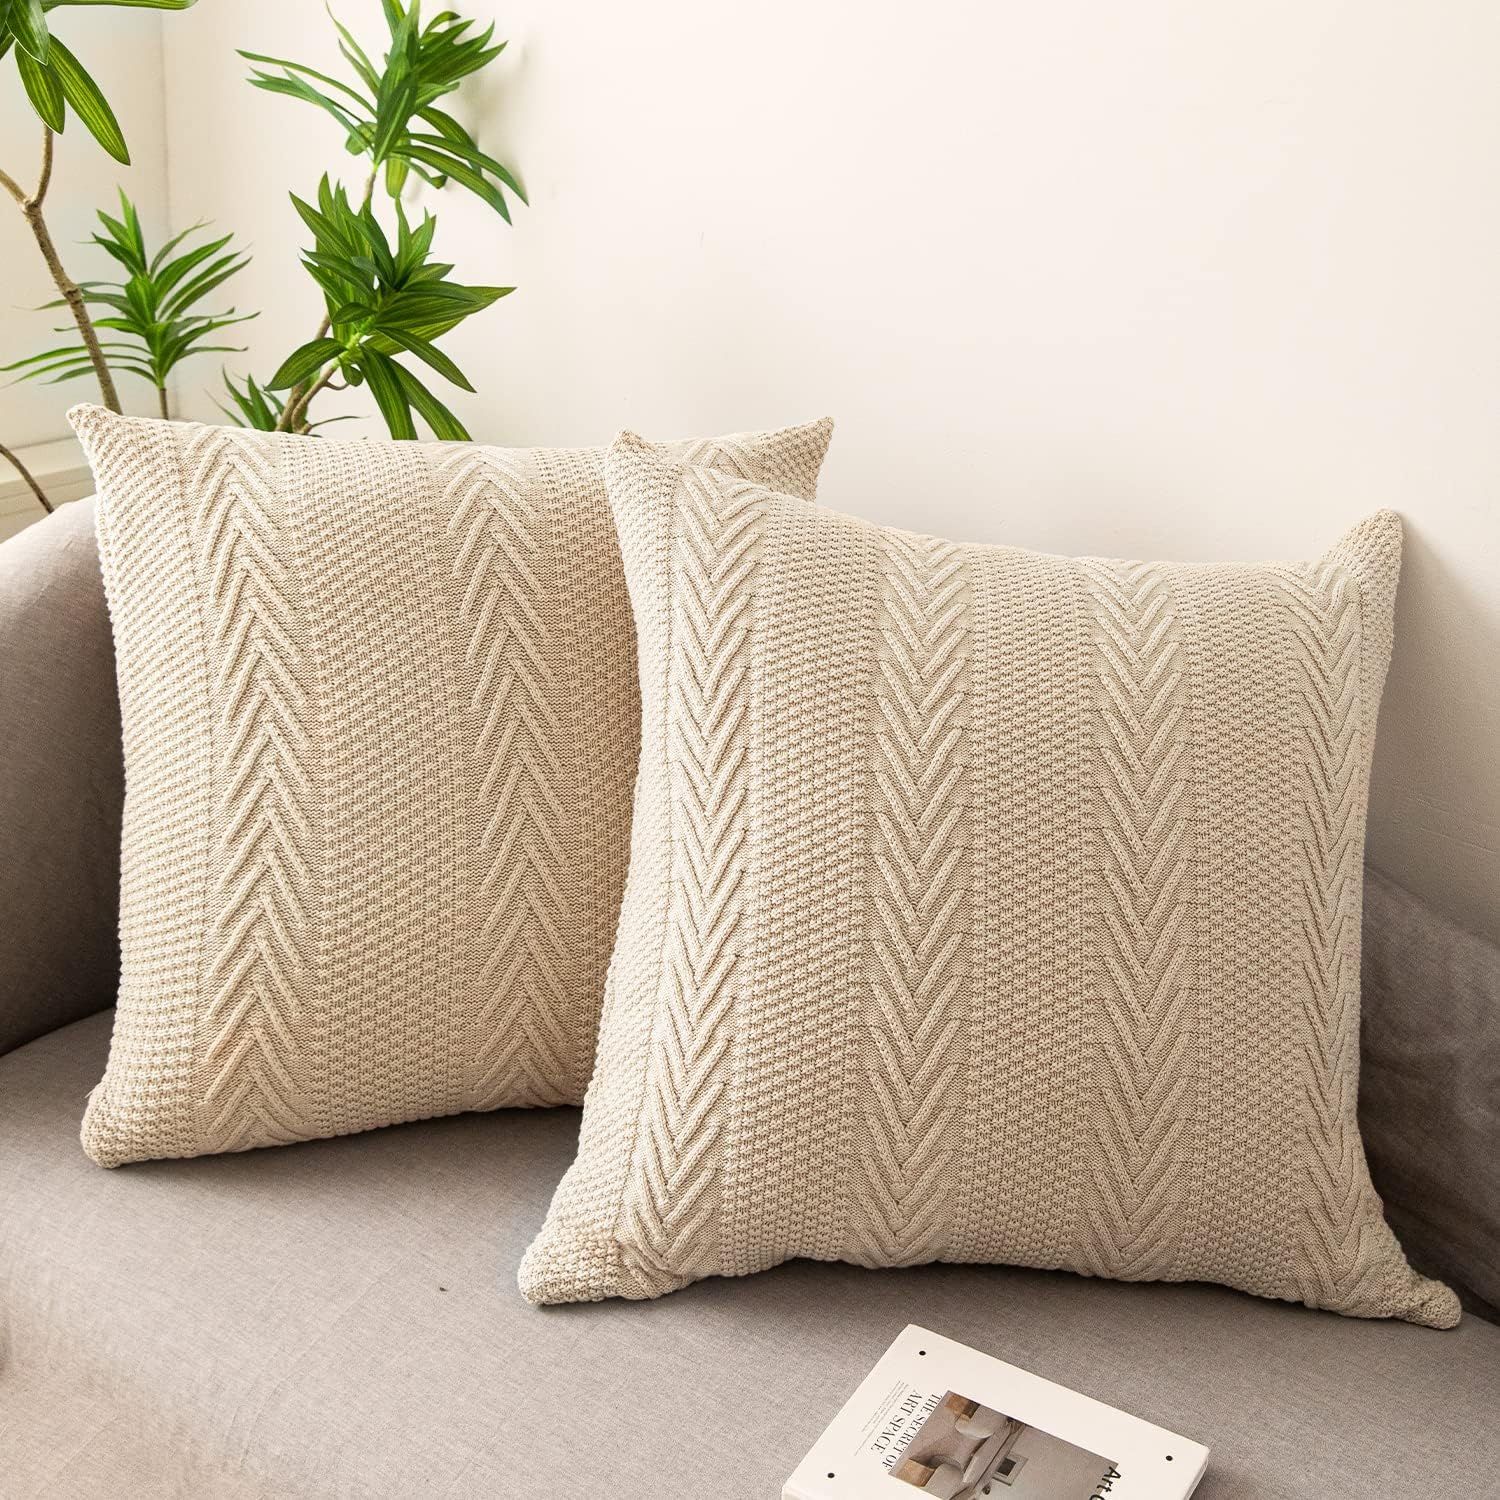 LiBcmlian Beige Knitted Throw Pillow Covers 22x22 Set of 2 Cotton Pillow Cushion Cases Cable Knit... | Amazon (US)